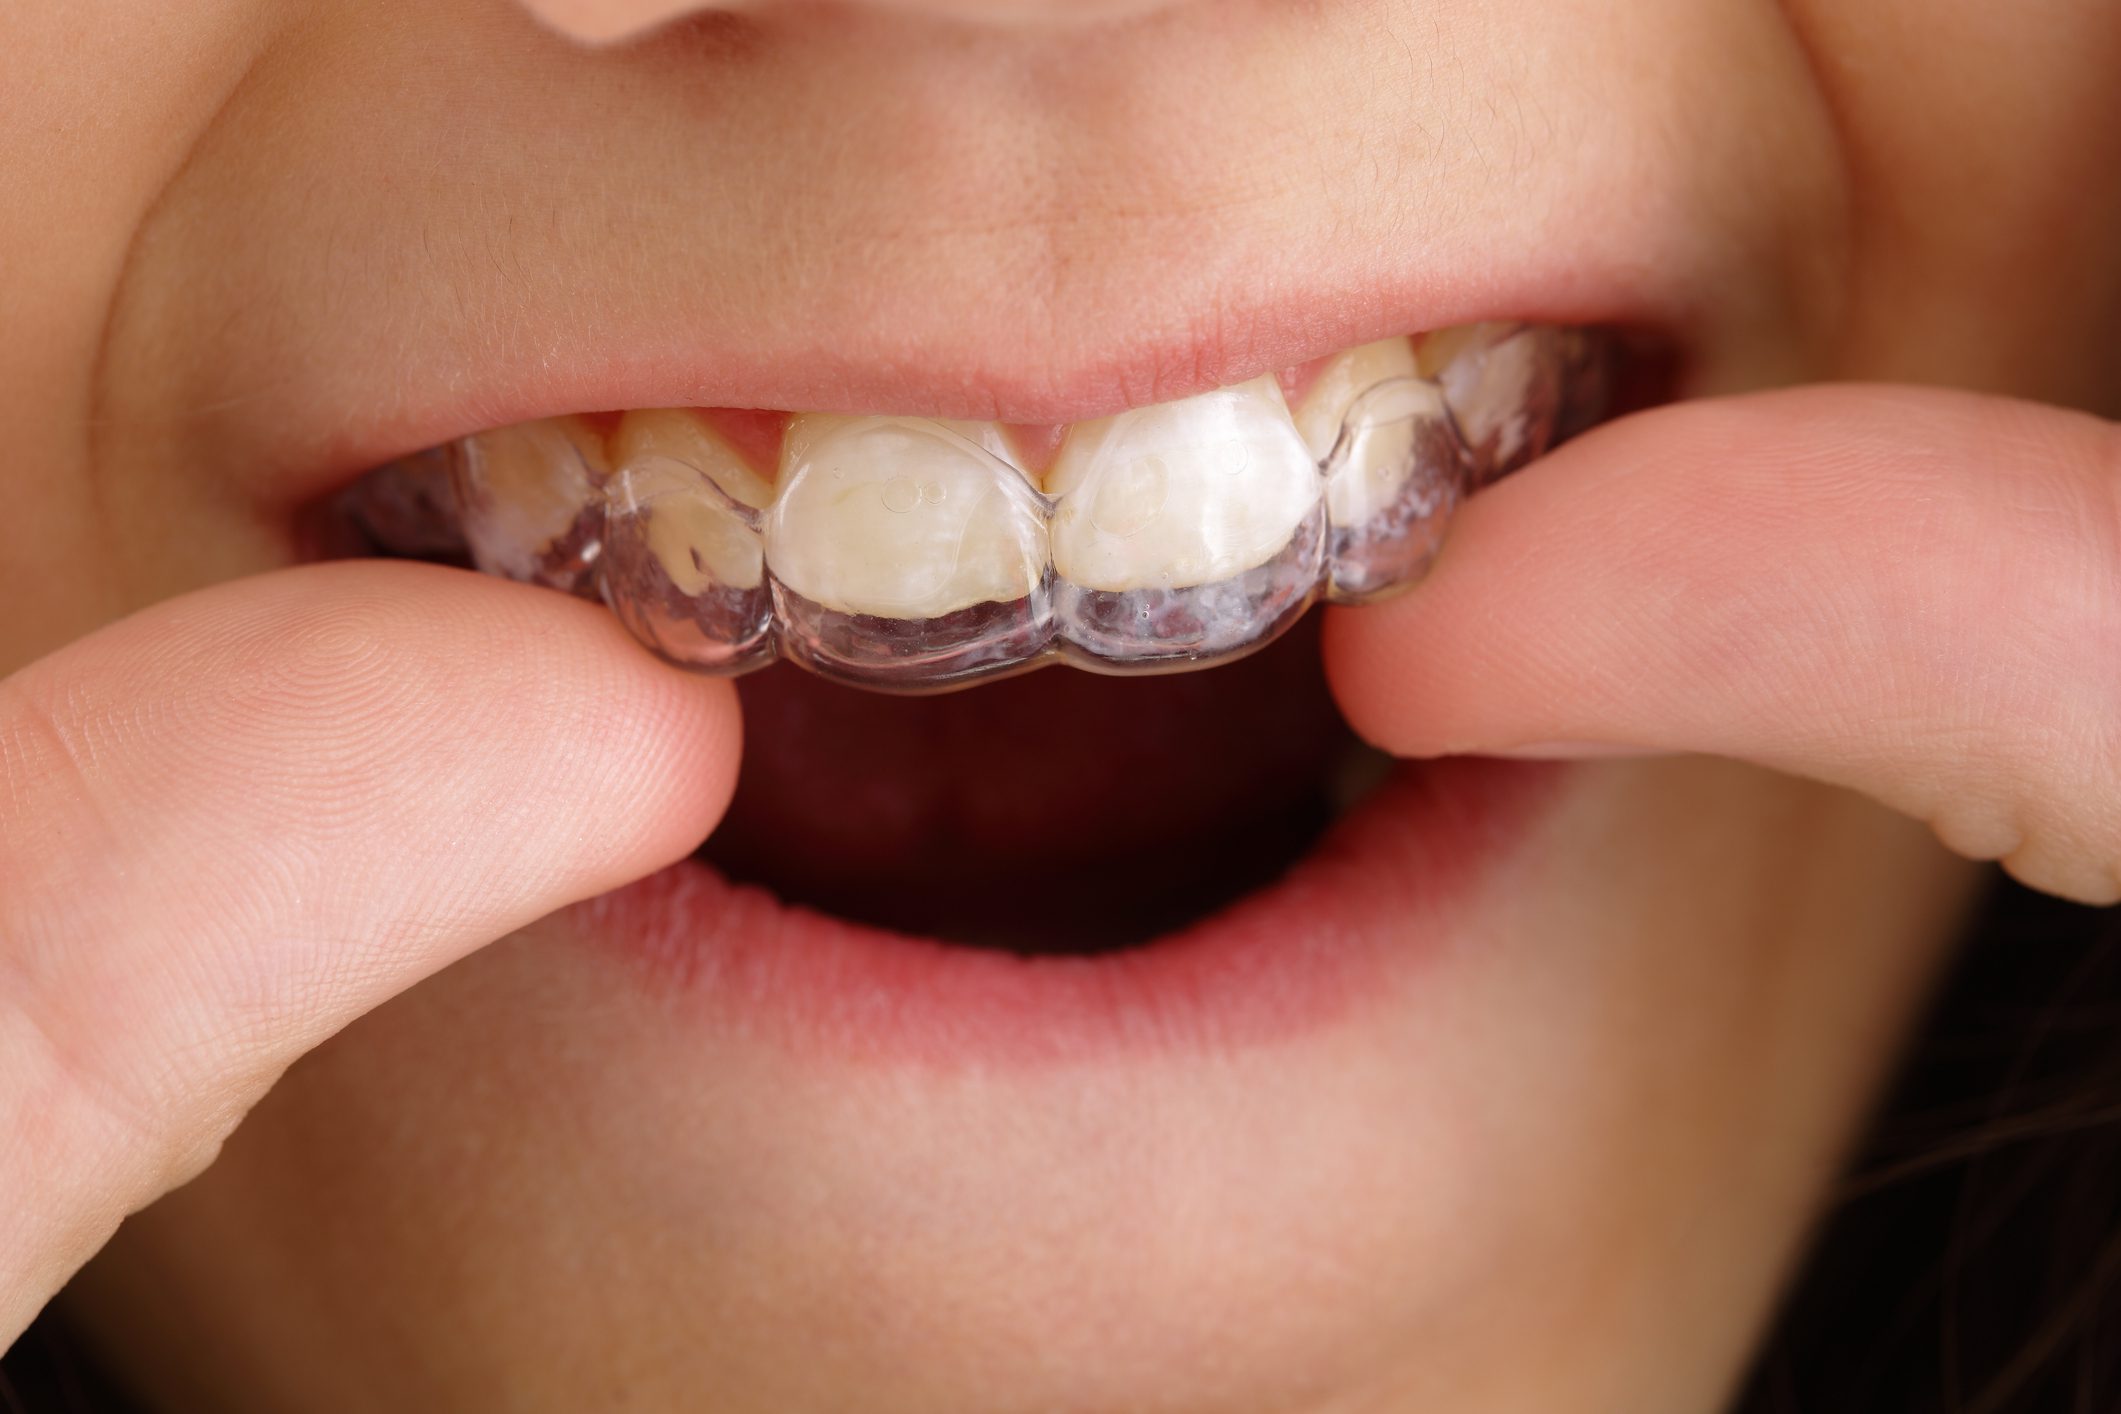 Are you a suitable candidate for orthodontic treatment? - Complete Dental